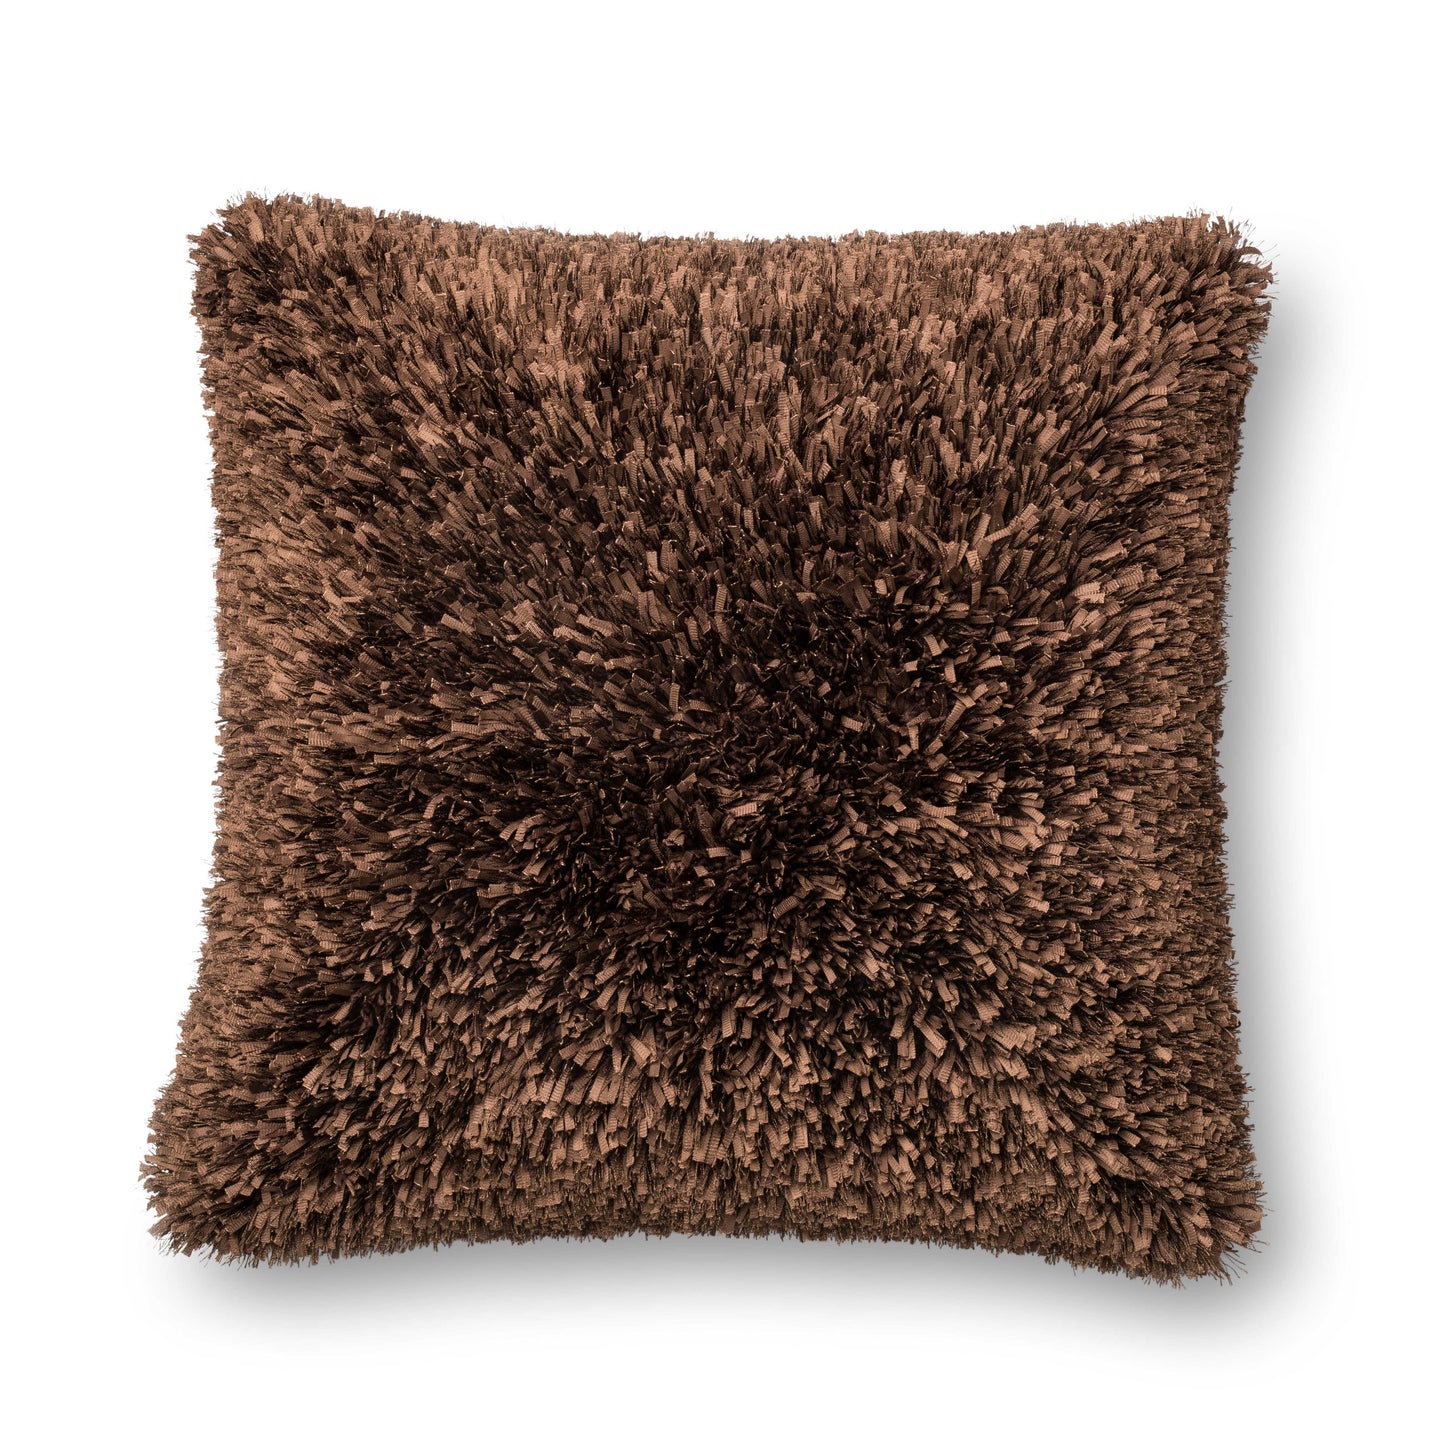 Photo of a pillow;  P0045 Brown 22" x 22" Cover w/Poly Pillow